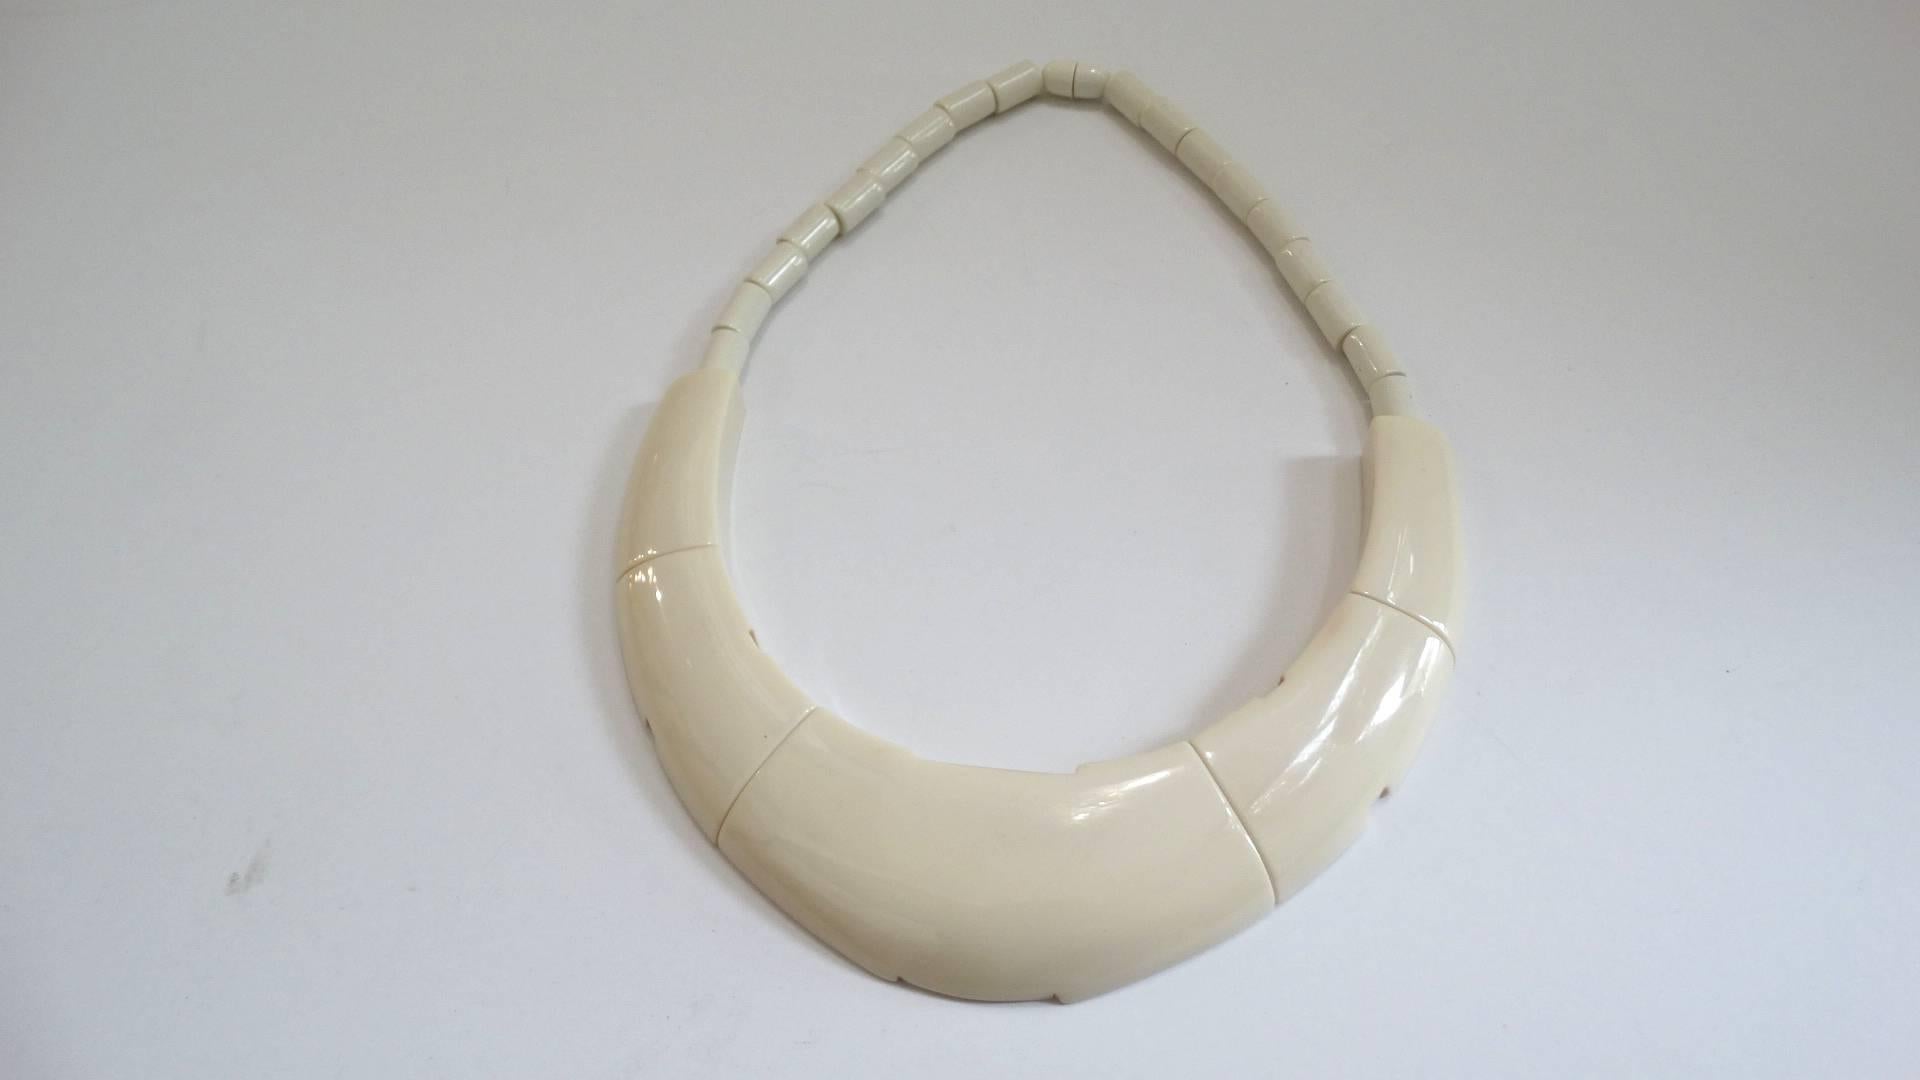 Straight out of the 1970s- this amazing necklace was designed by Francois Schoenlaub’s label “Guillemette L’Hoir- Paris.” Crafted from French bakelite, known as Galalith- in a creamy white color. Futuristic, mod silhouette with unique fractured